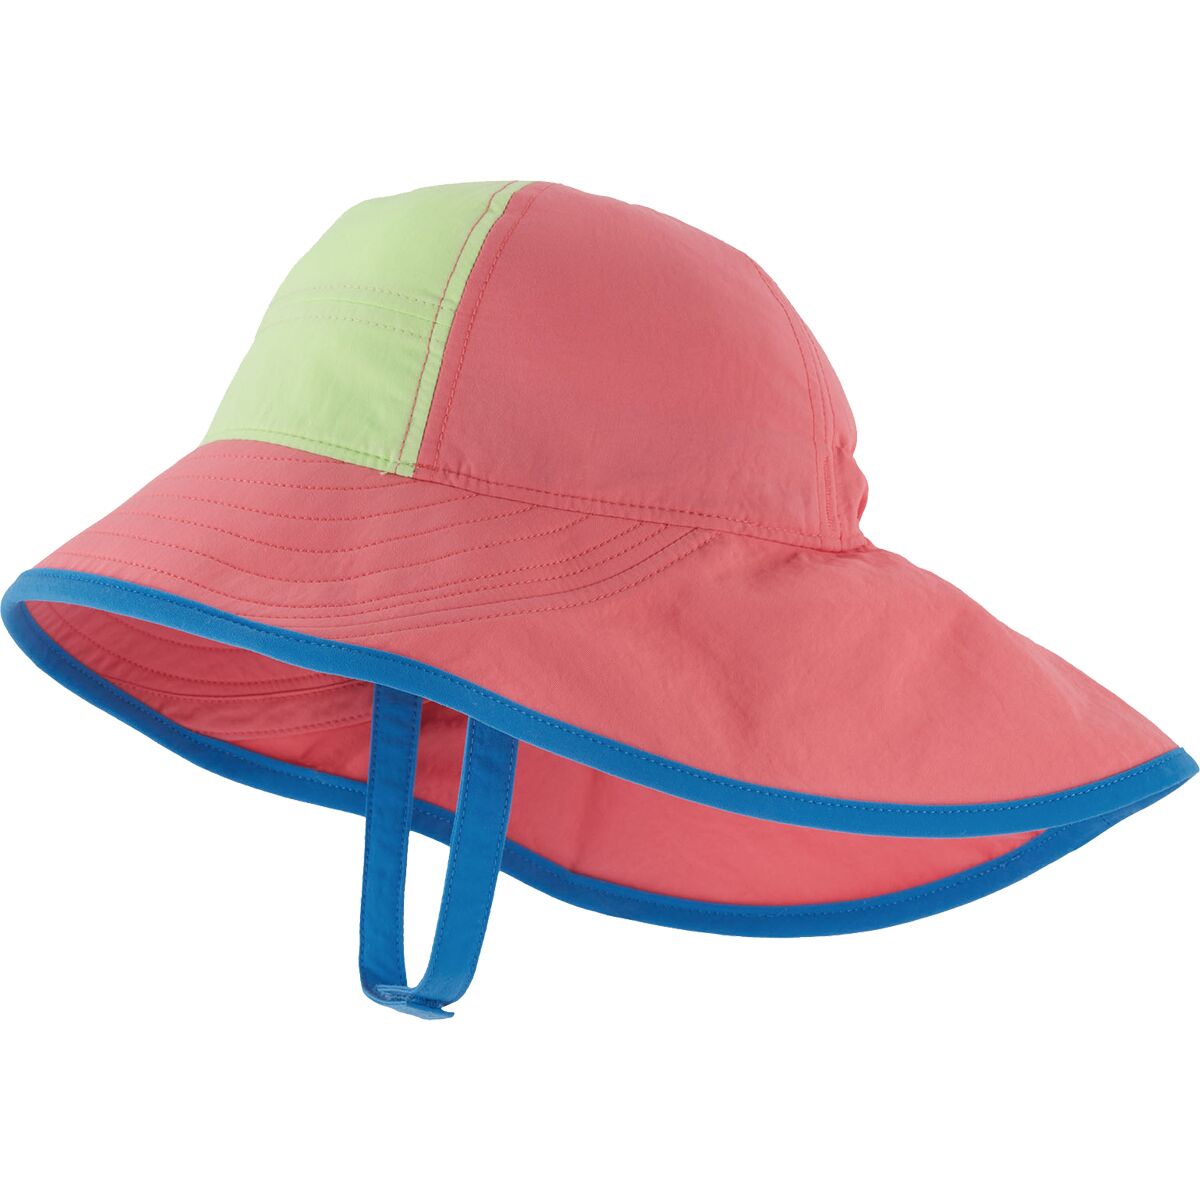 Детская шапка block-the-sun – детская Patagonia, розовый 2020 new baby summer accessories holiday baby kids boy girl hat breathable hat beach straw sun hat hollow out caps